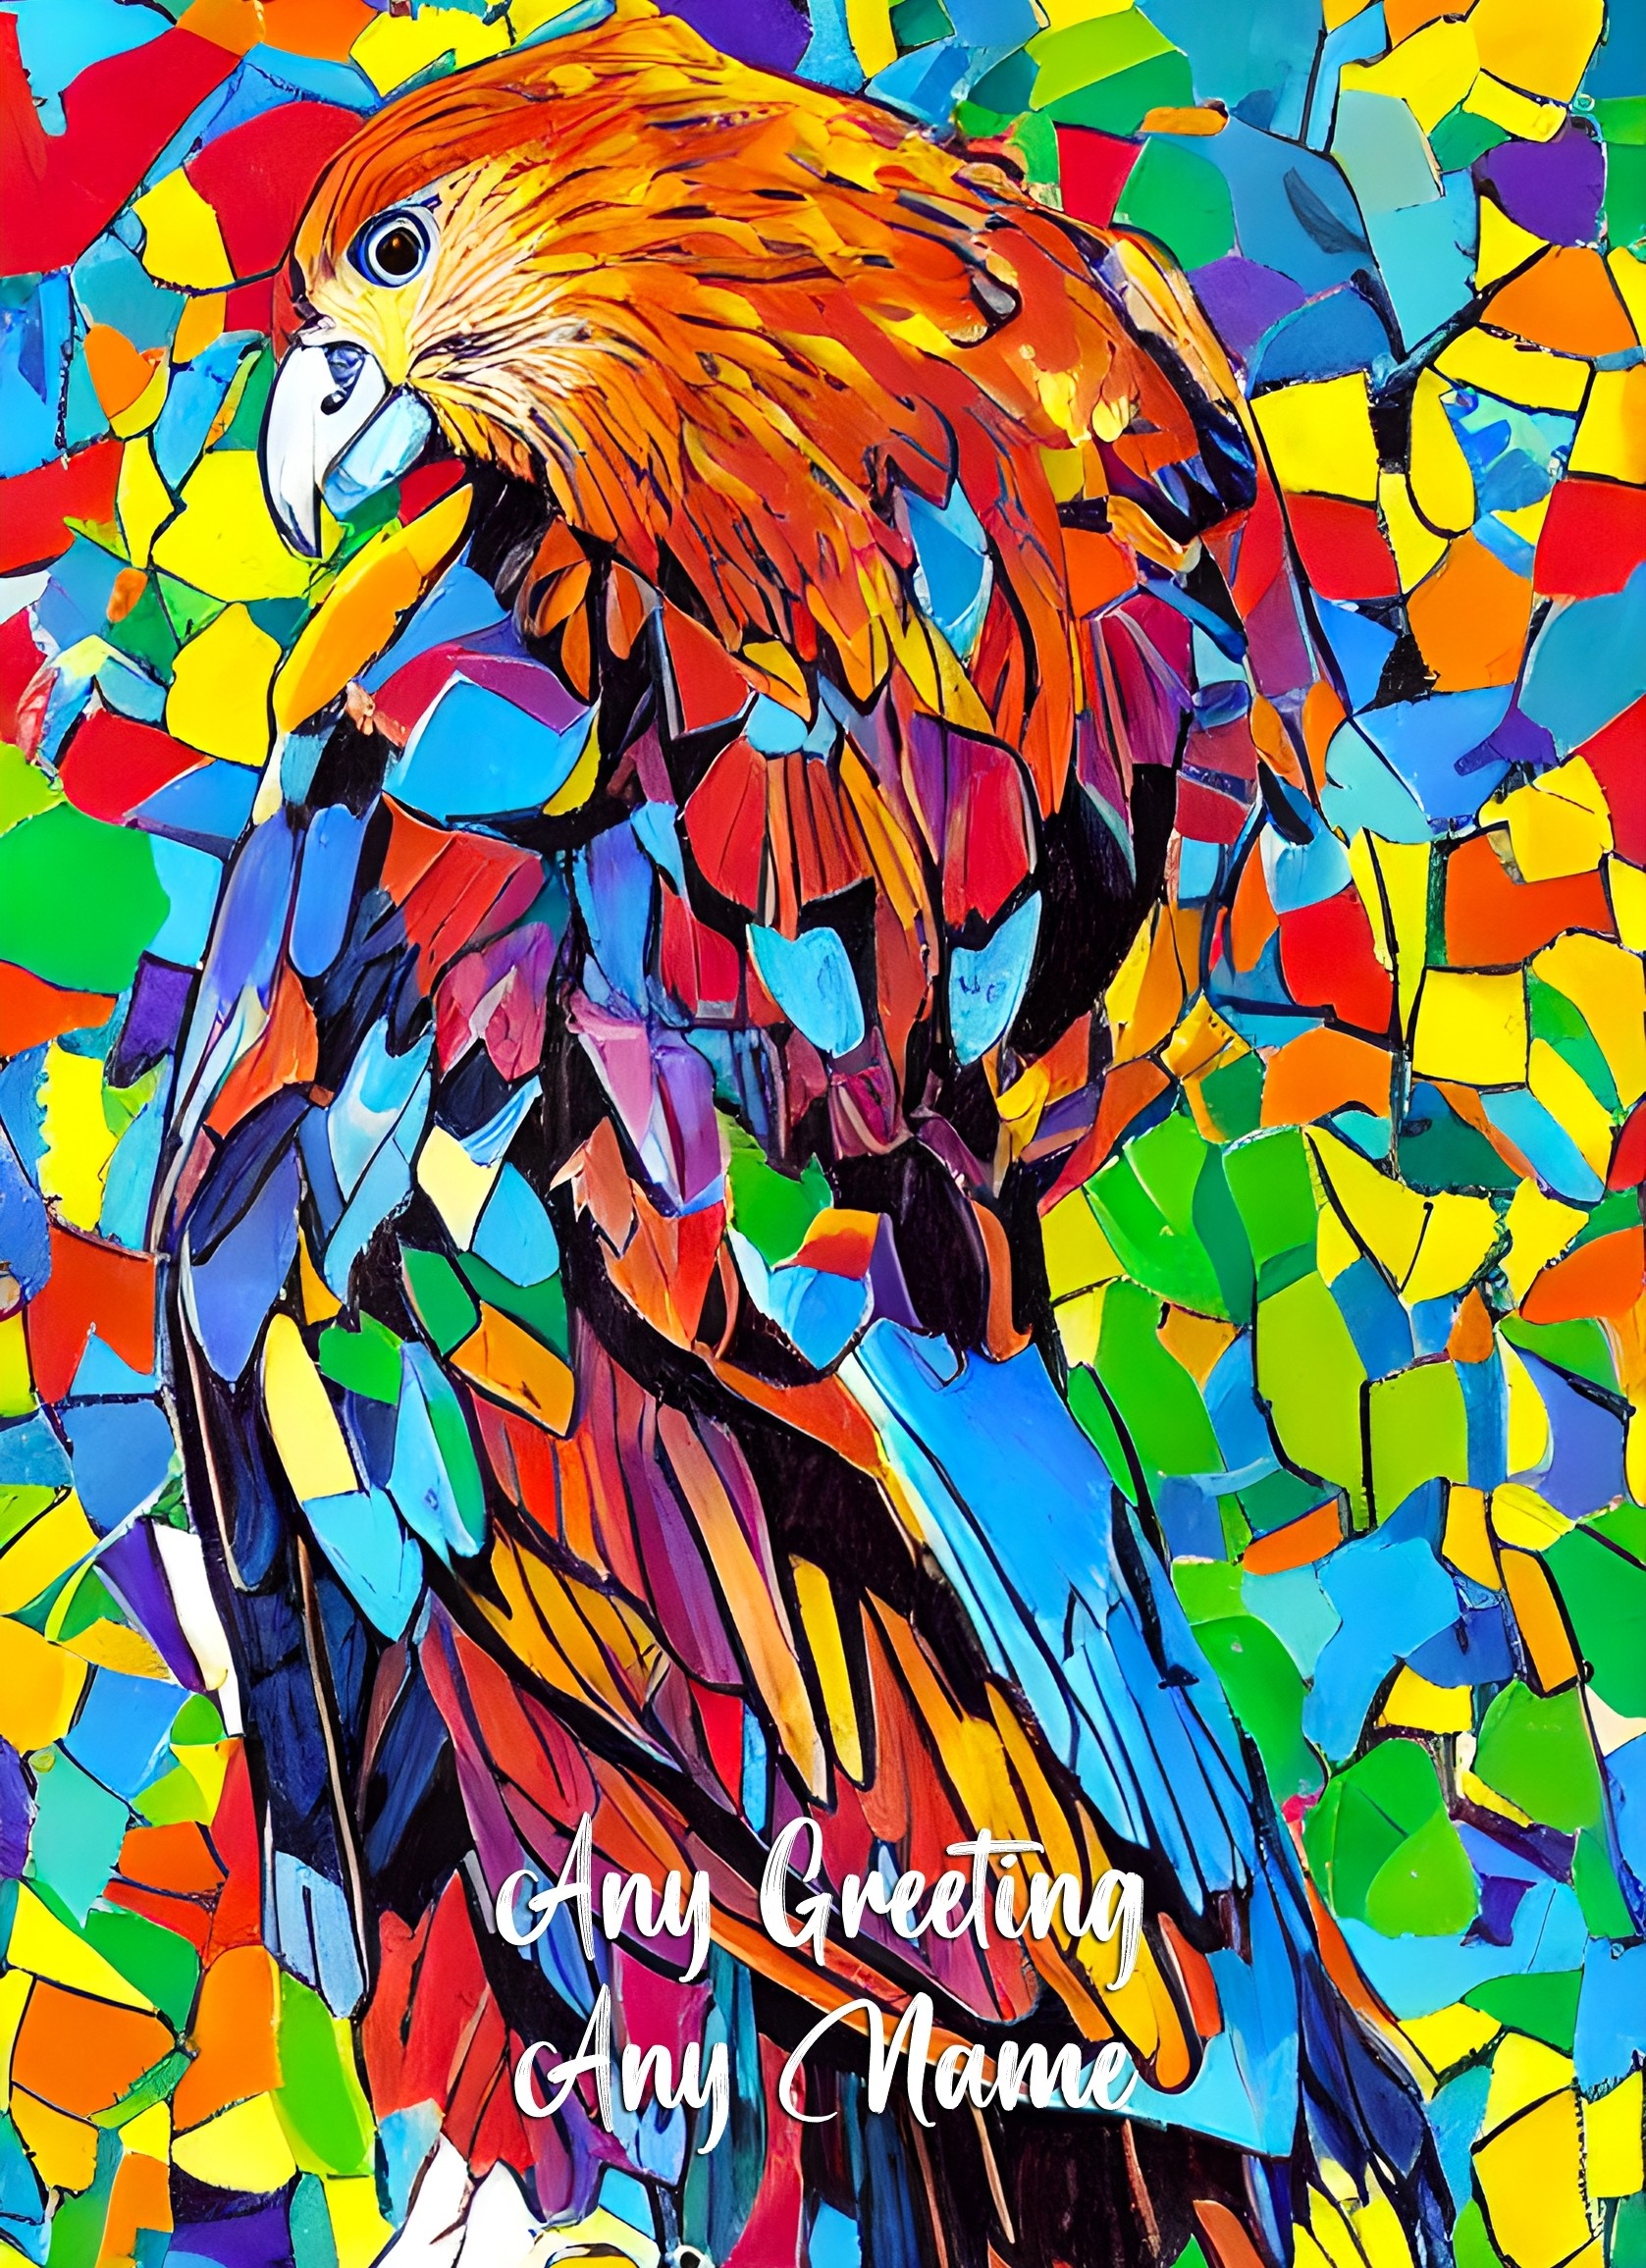 Personalised Hawk Animal Colourful Abstract Art Greeting Card (Birthday, Fathers Day, Any Occasion)